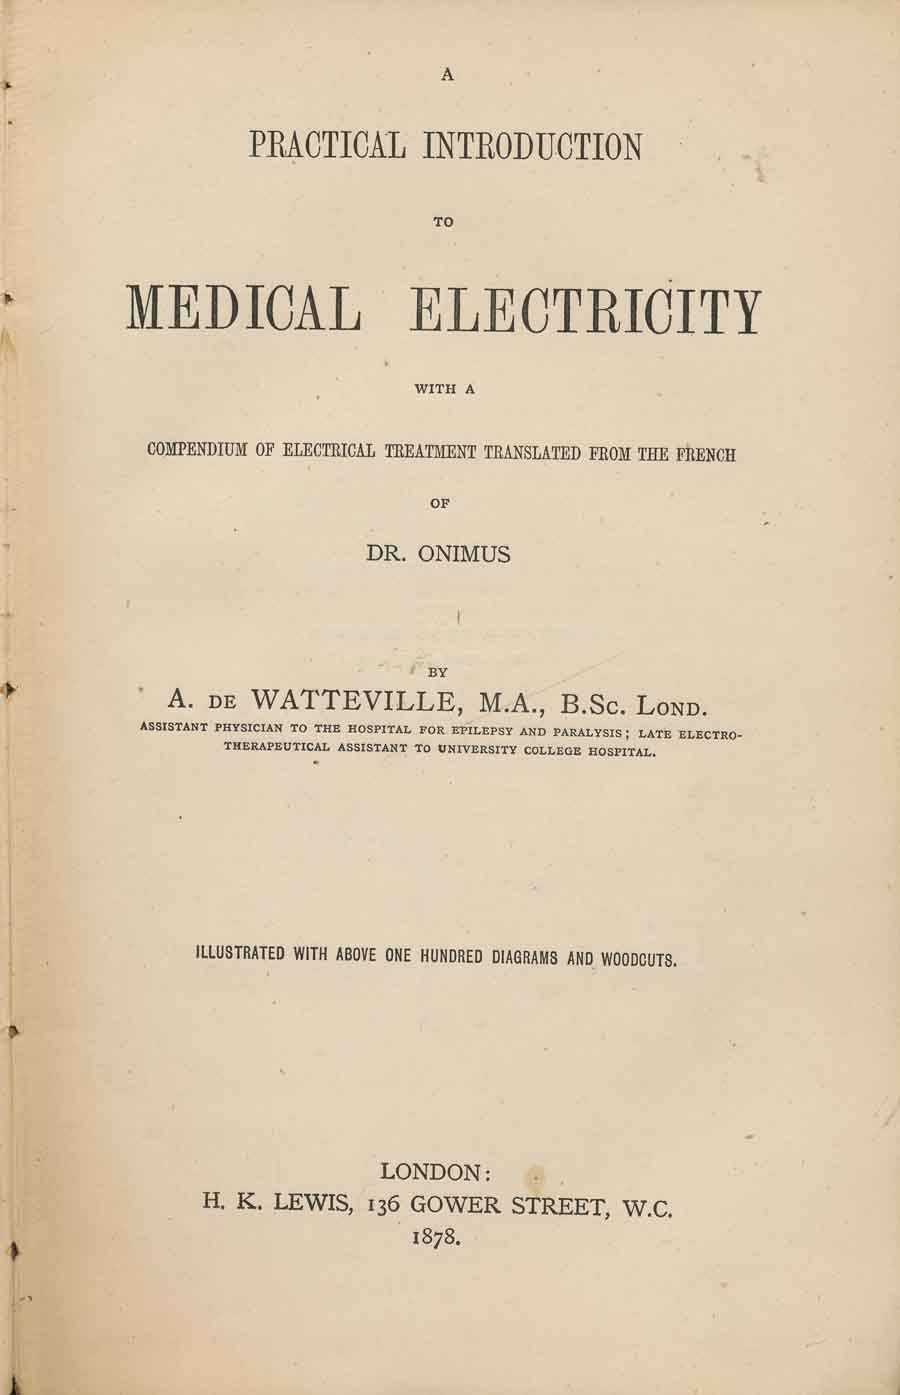 WATTEVILLE, A. DE - A Practical Introduction to Medical Electricity